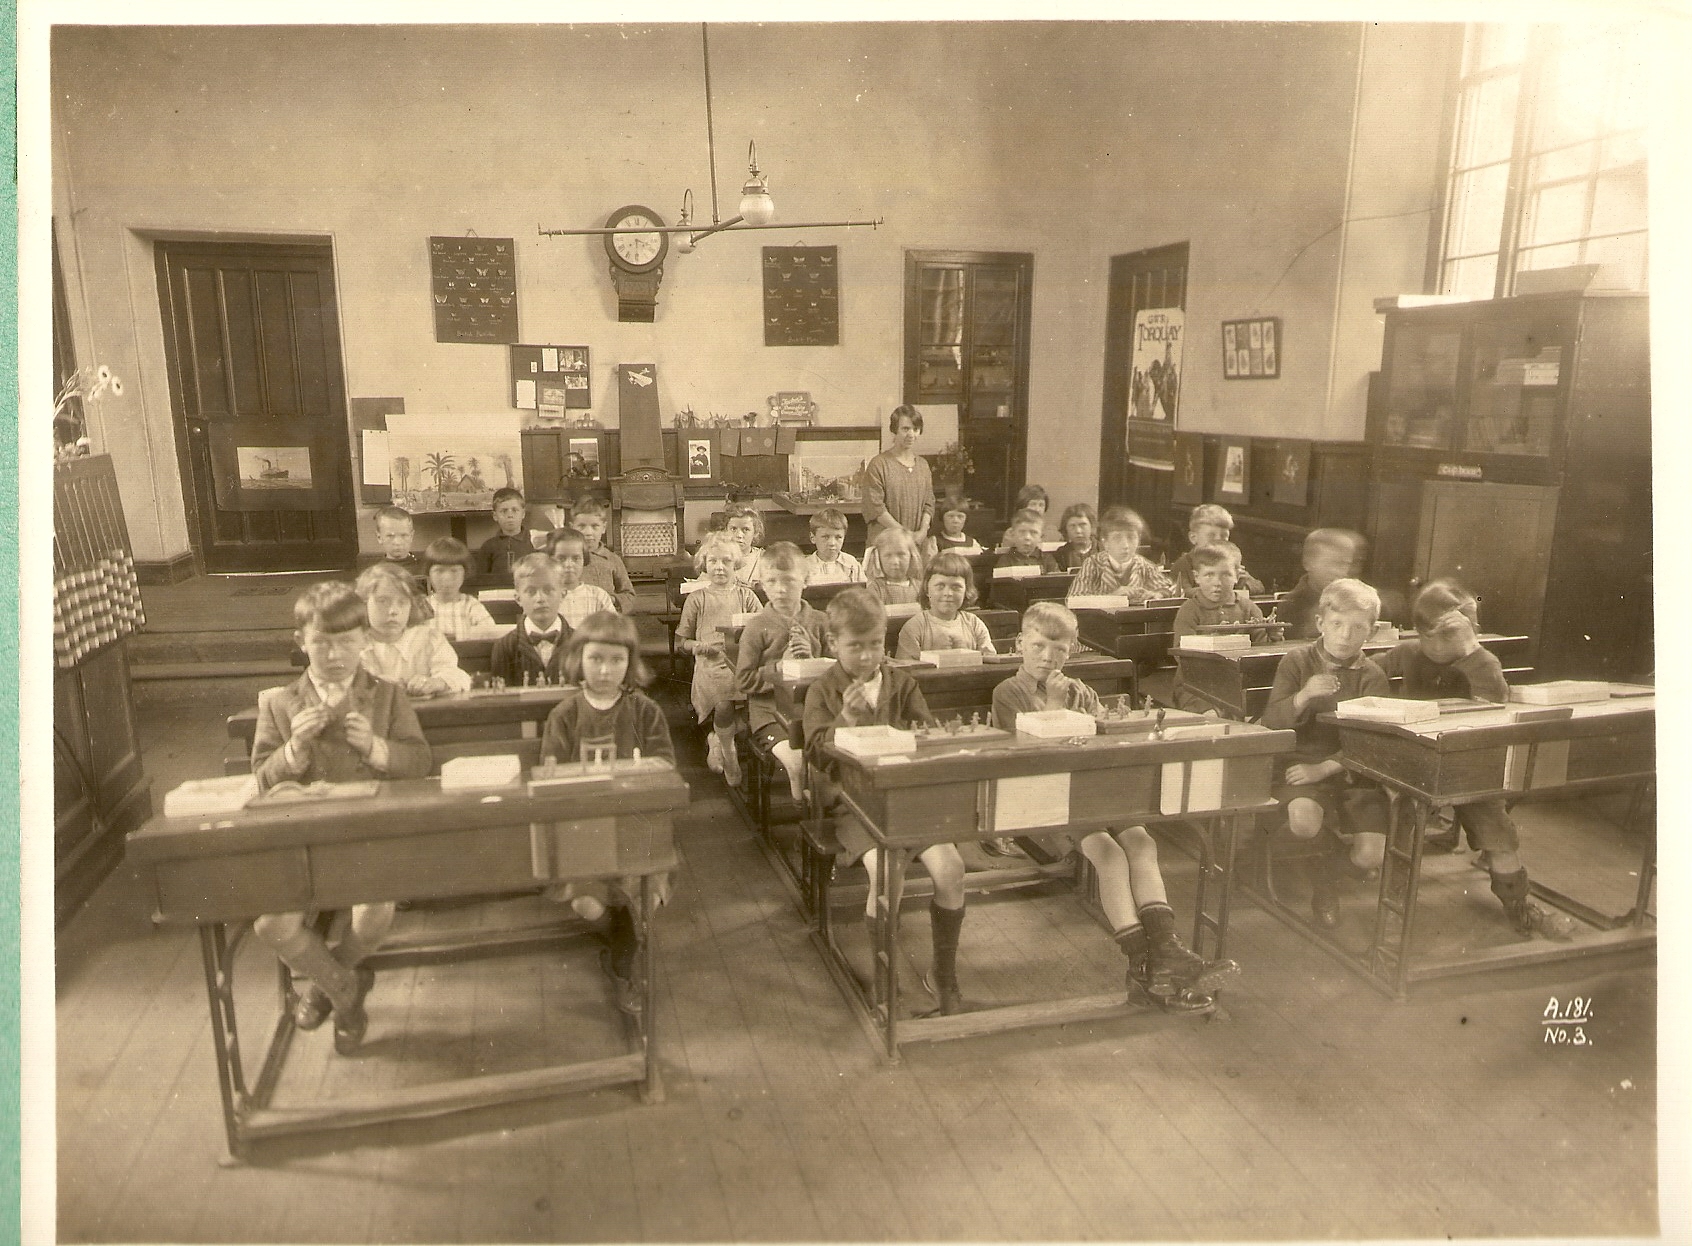 A black and white photo of a school room with children sitting at desks